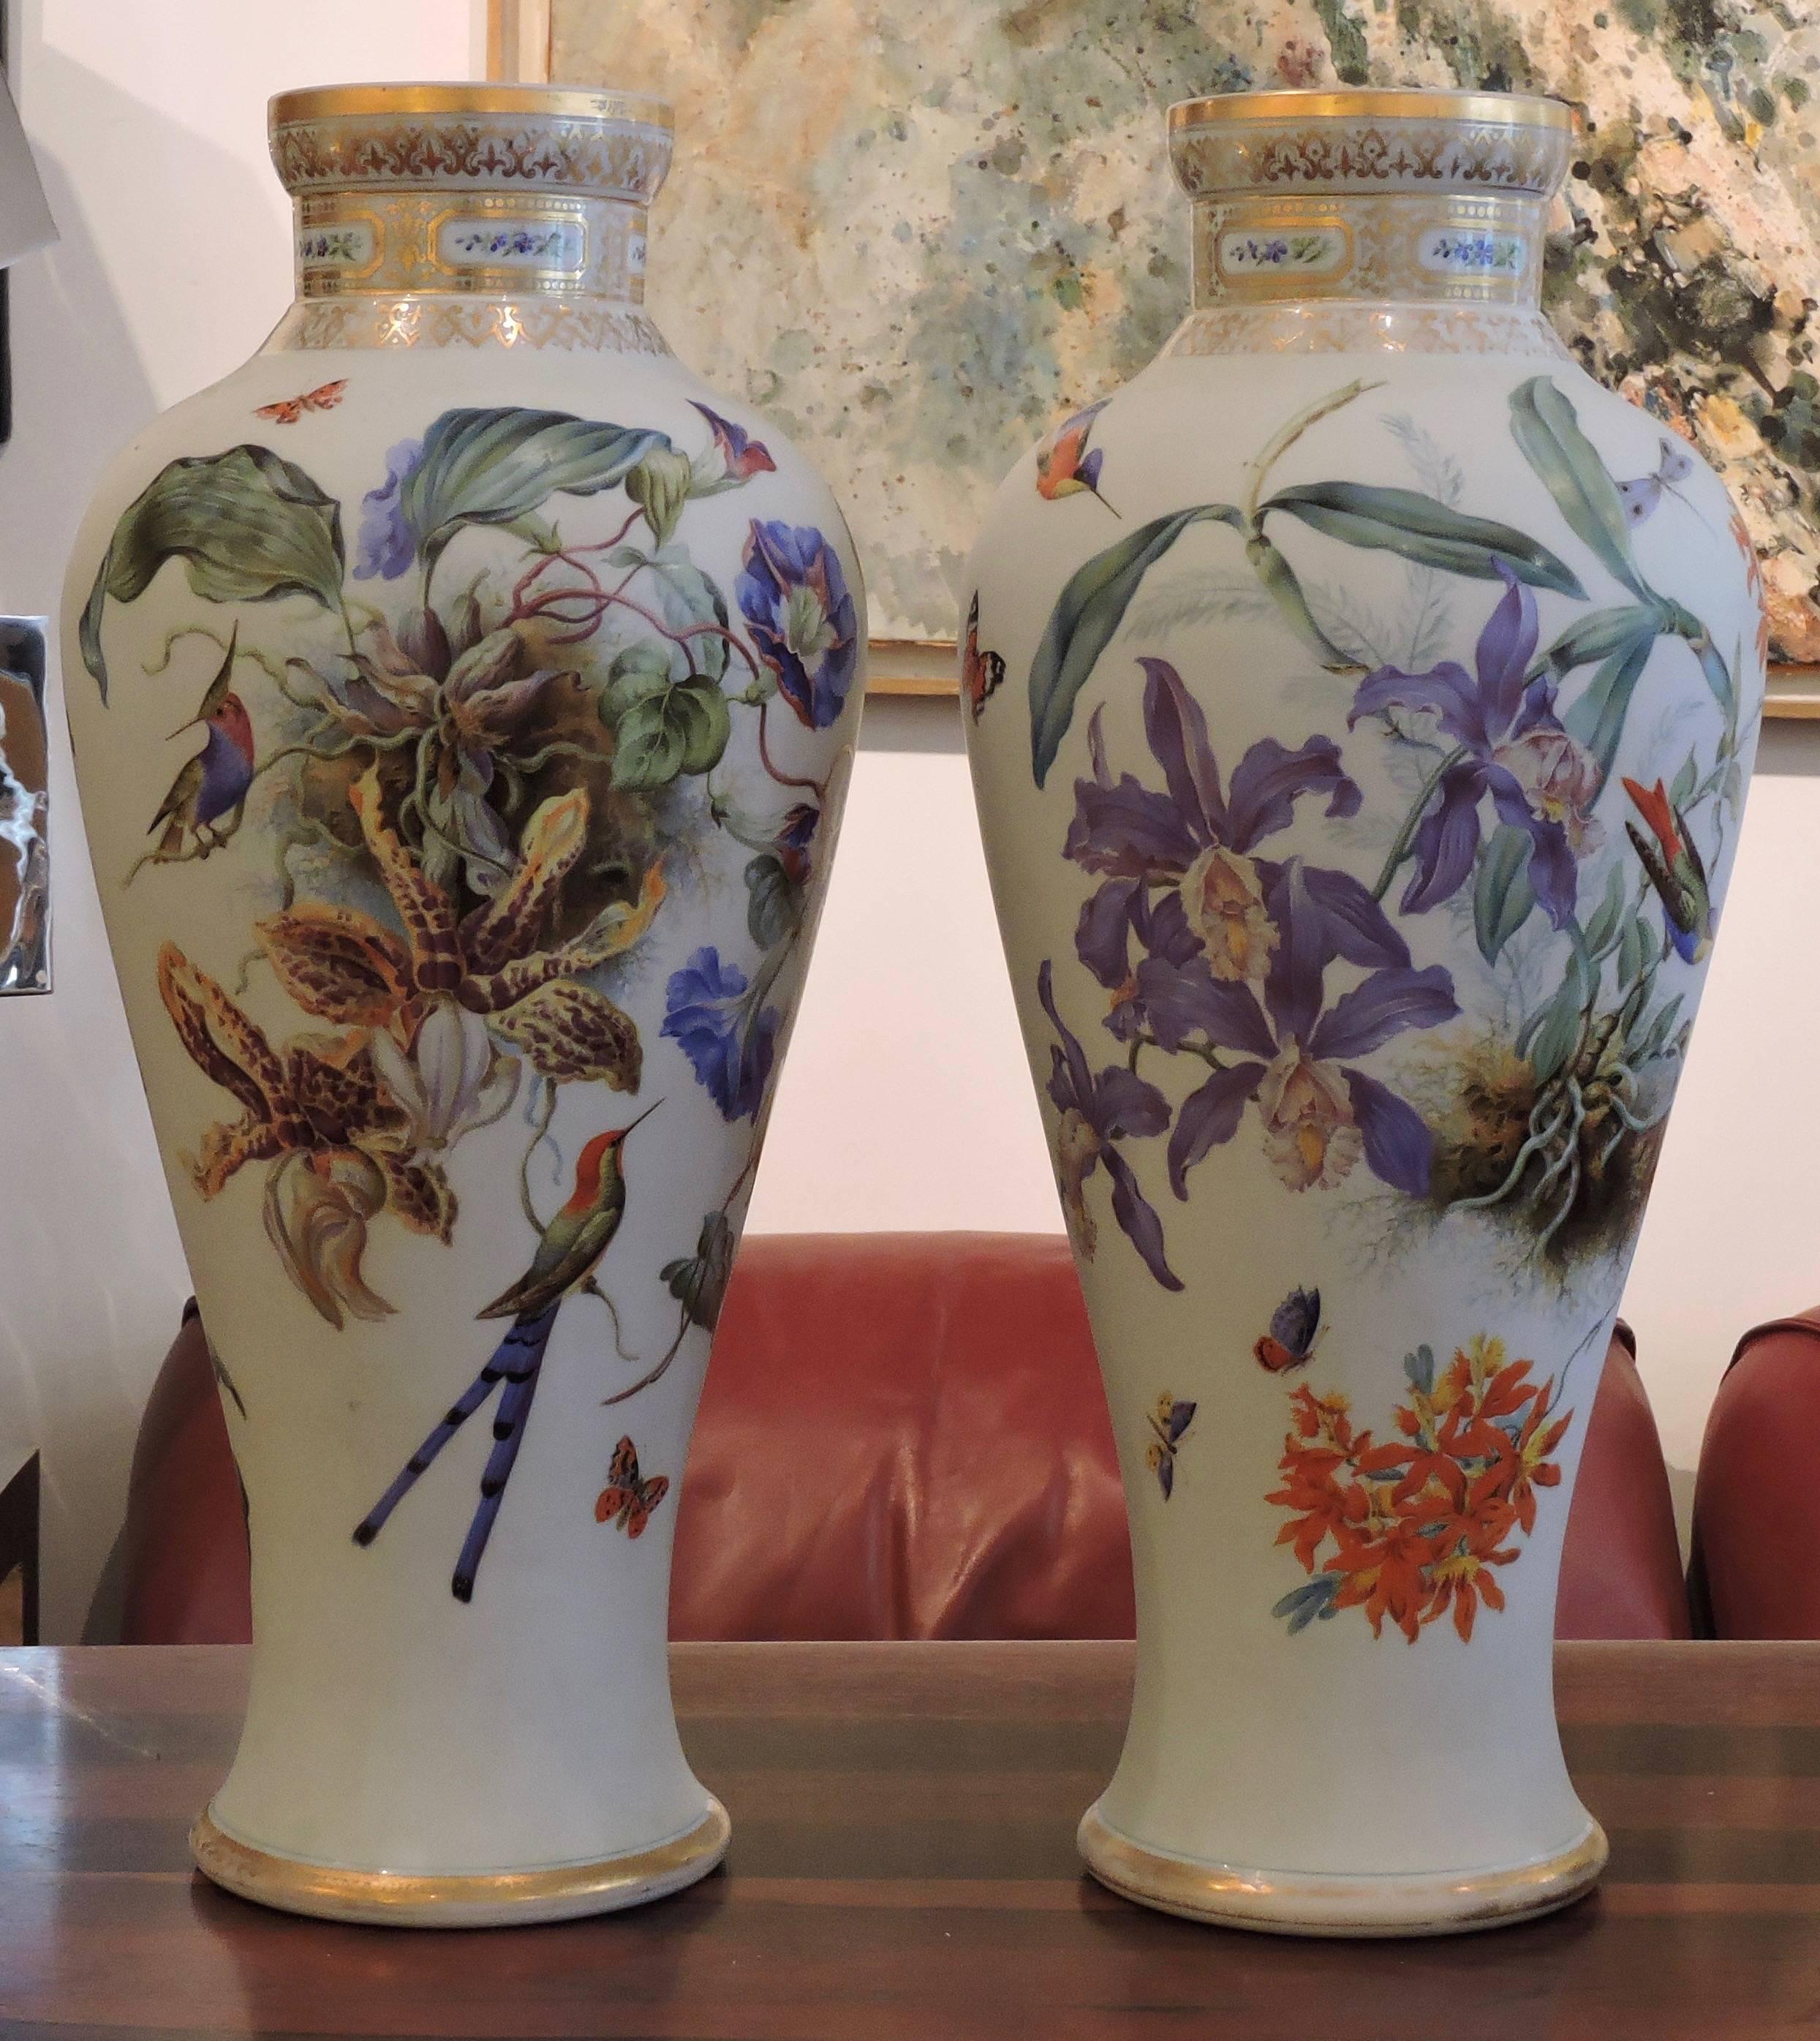 Pair of Baccarat white enamelled opaline glass vases with birds, butterflies, dogrose, Wisteria and other flowering branches and Foliage.
circa 1840.
  